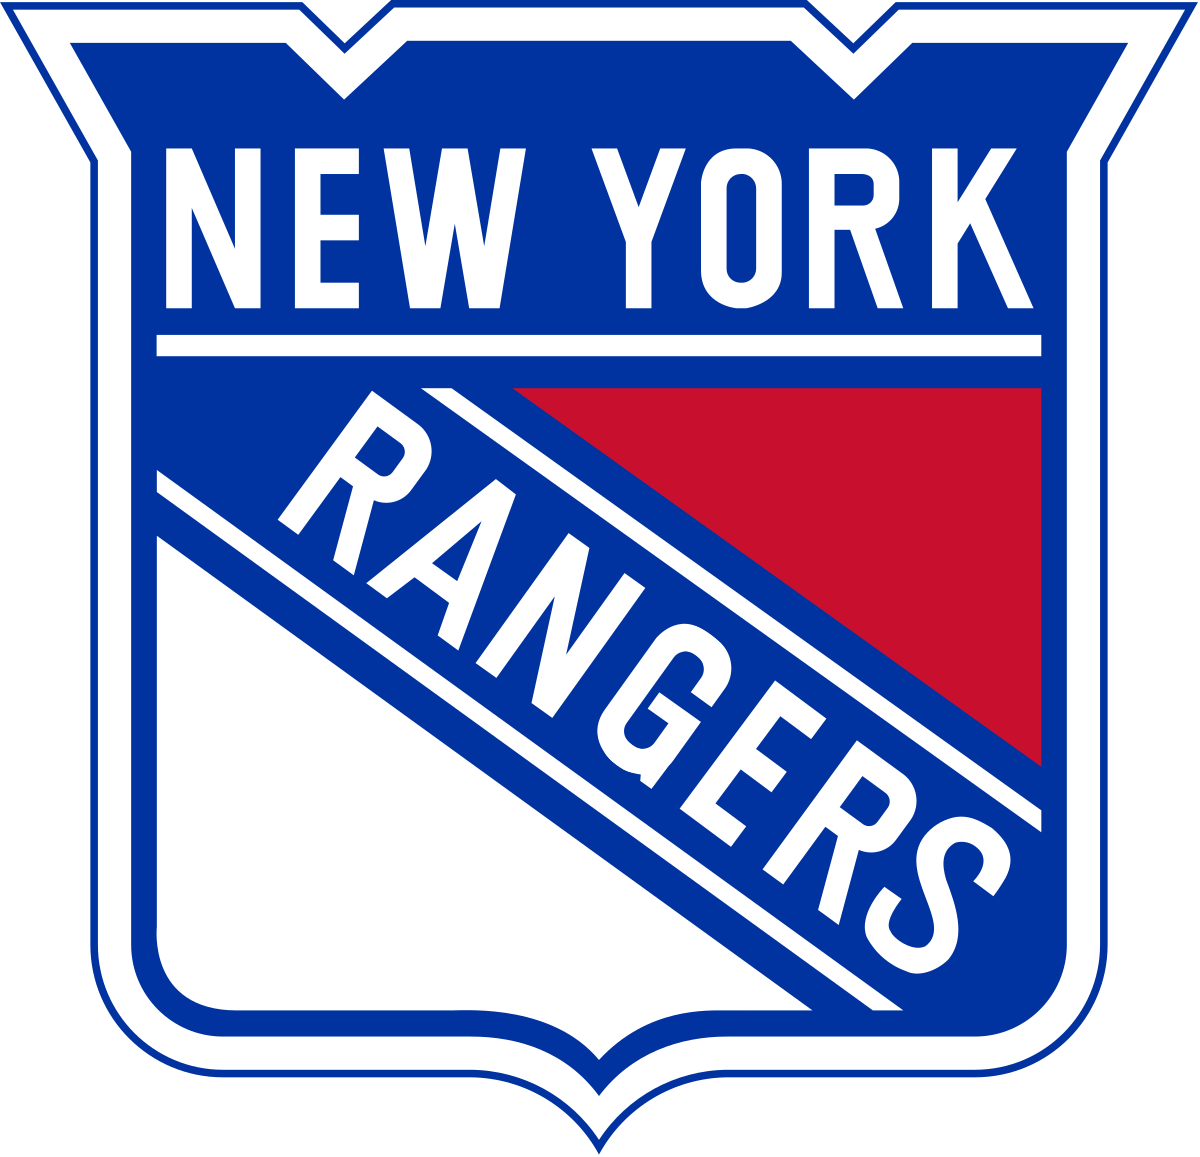 https://upload.wikimedia.org/wikipedia/commons/thumb/a/ae/New_York_Rangers.svg/1200px-New_York_Rangers.svg.png